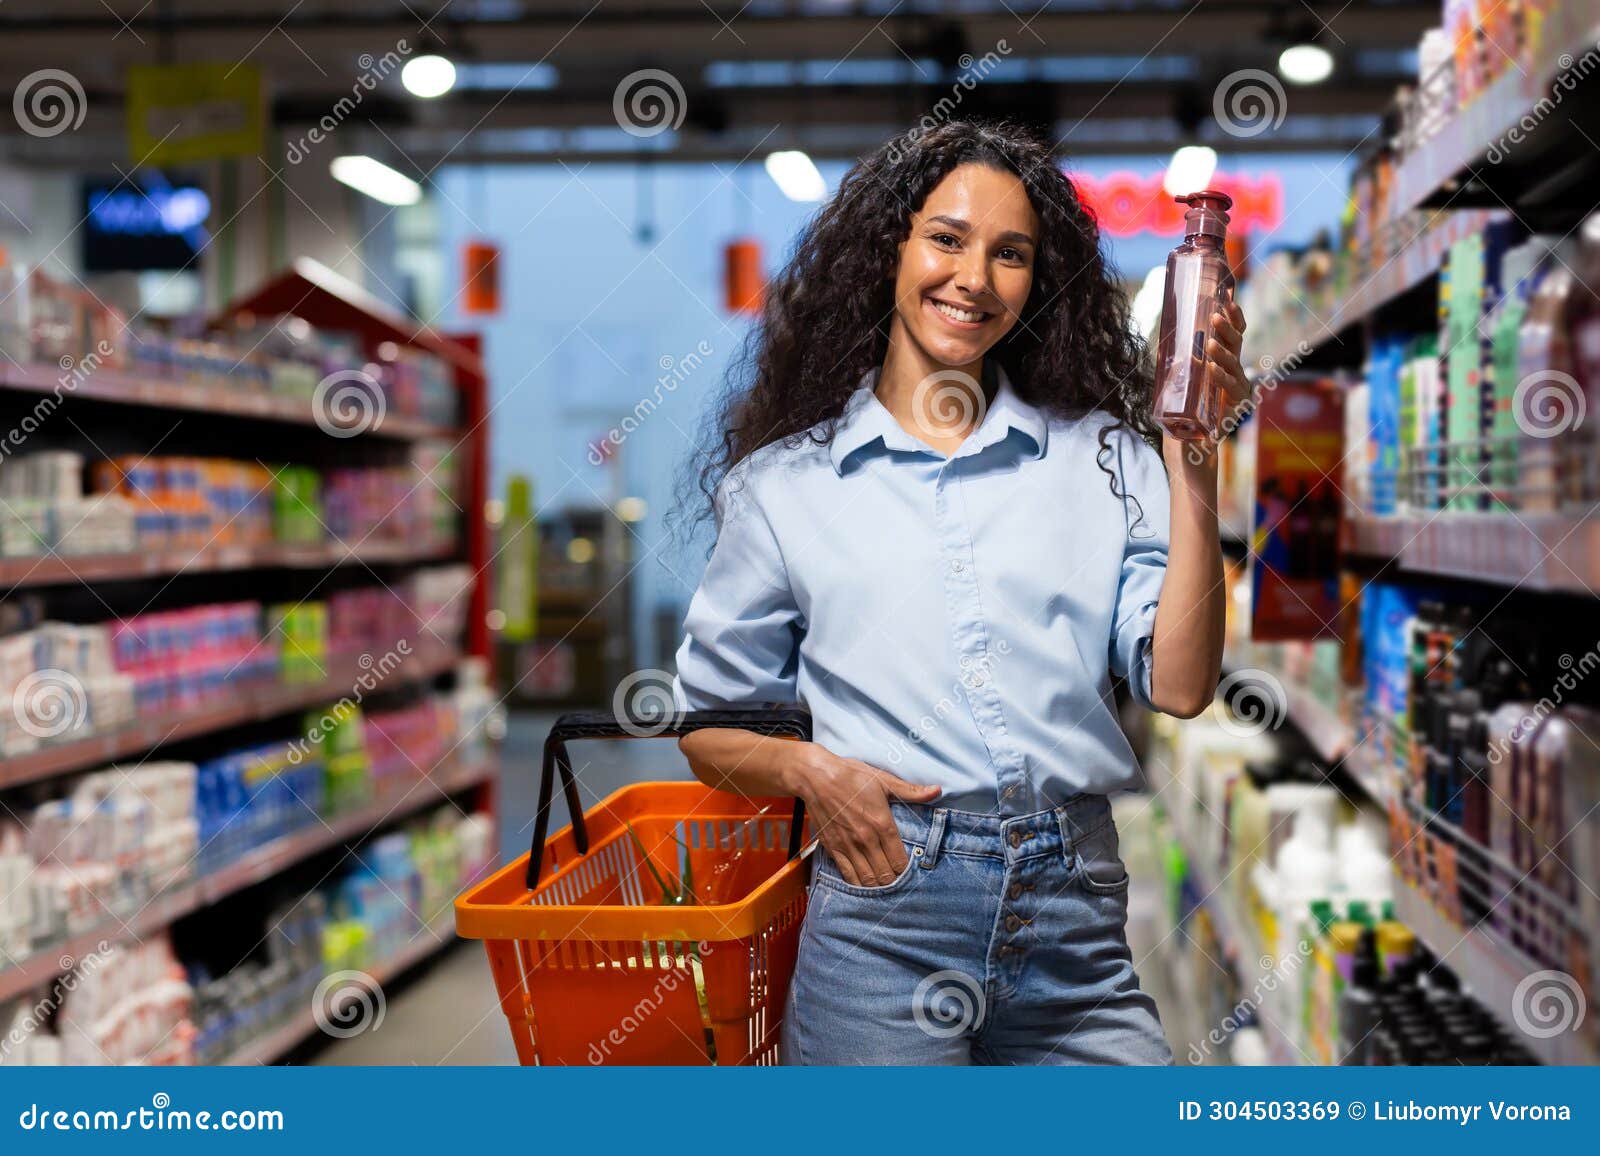 Smiling Woman Shopping in Supermarket Aisle Holding Bottle and Basket ...